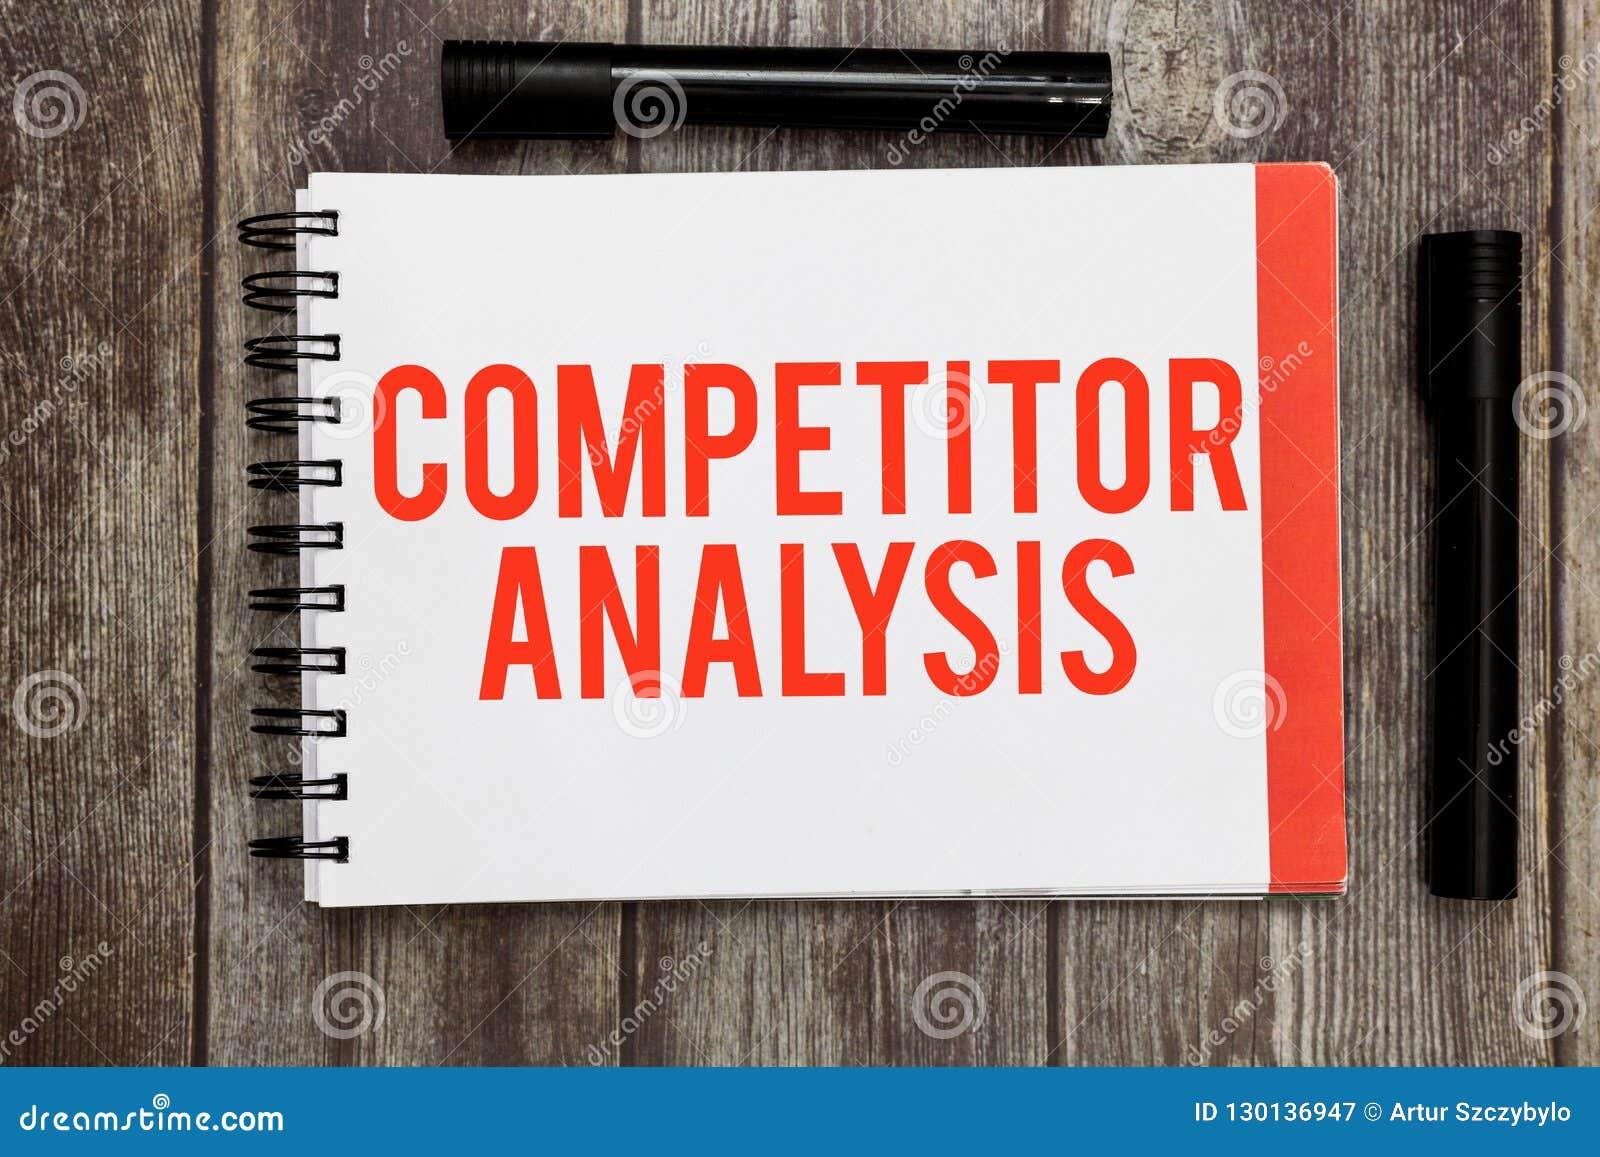 57+ Thousand Competitive Analysis Royalty-Free Images, Stock Photos &  Pictures